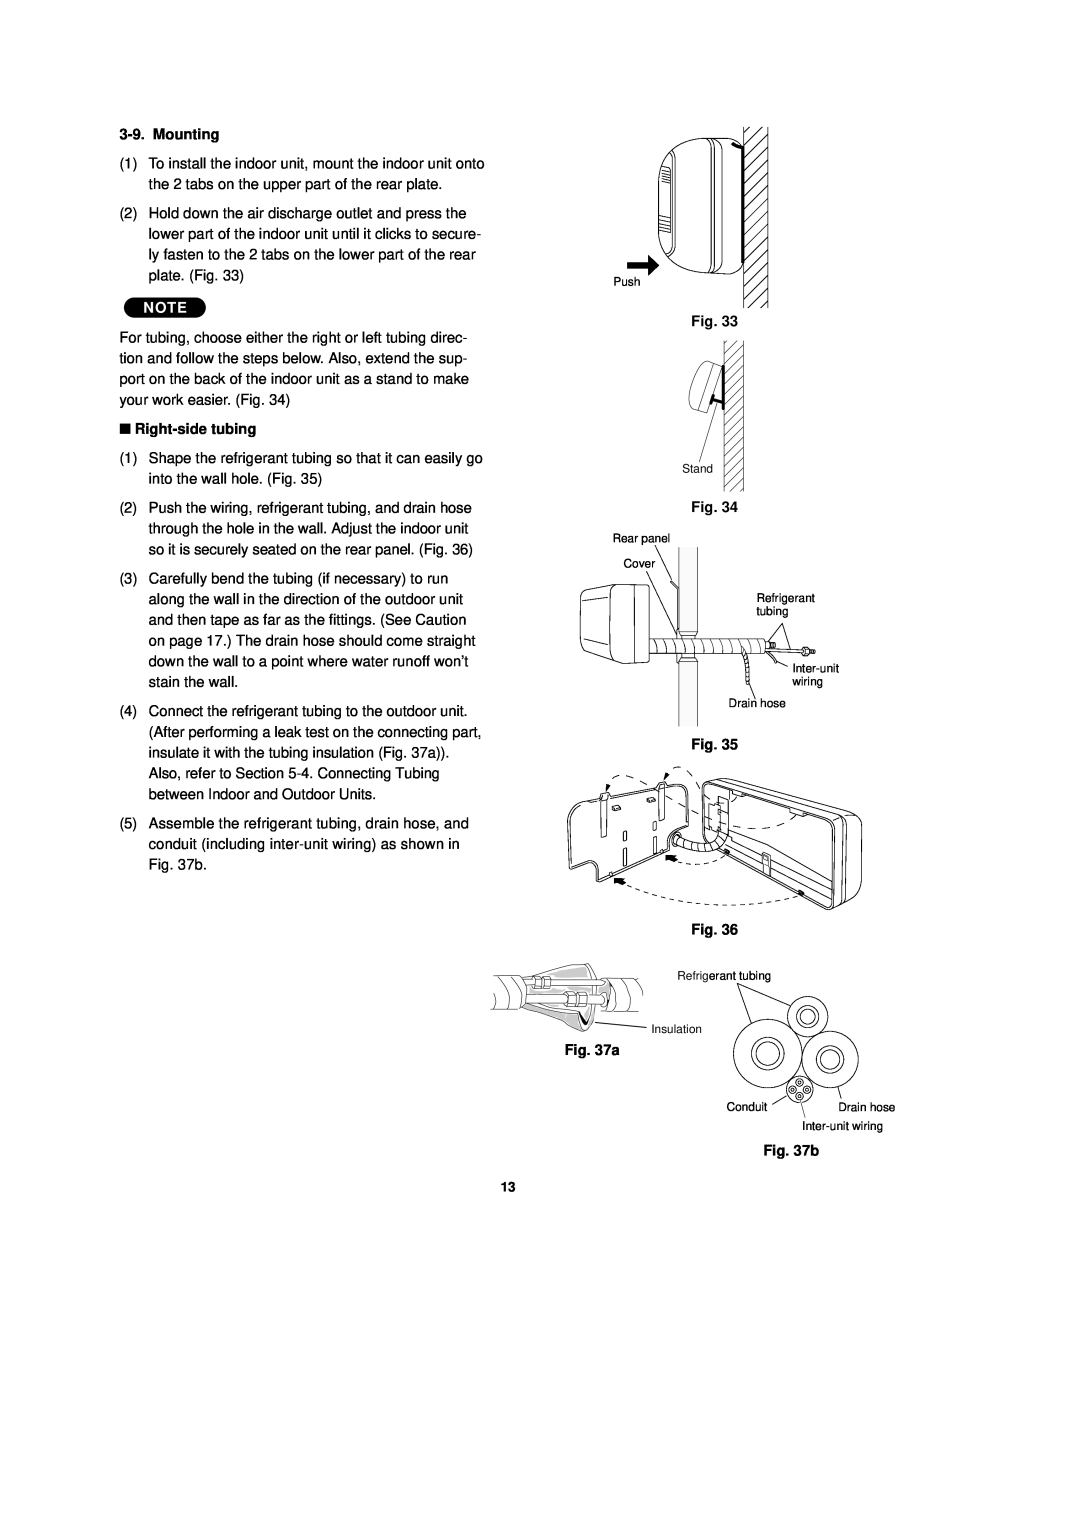 Sanyo CH0951, CH1251 installation instructions Mounting, Right-sidetubing, Fig. Fig 